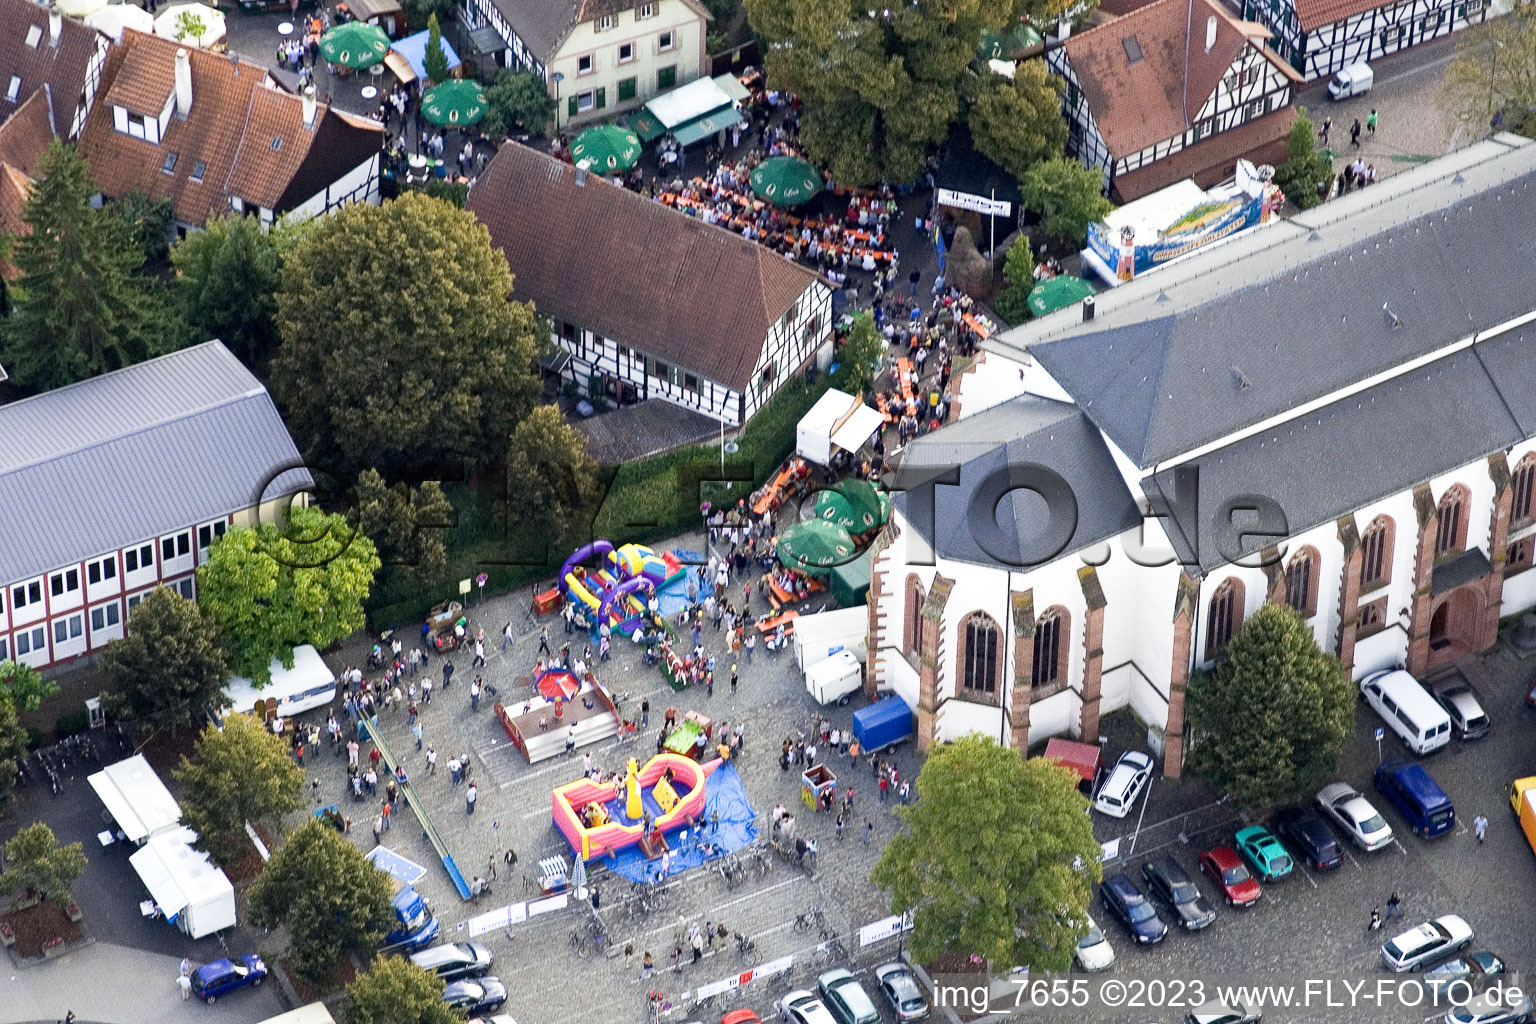 Aerial view of City festival, market square in Kandel in the state Rhineland-Palatinate, Germany